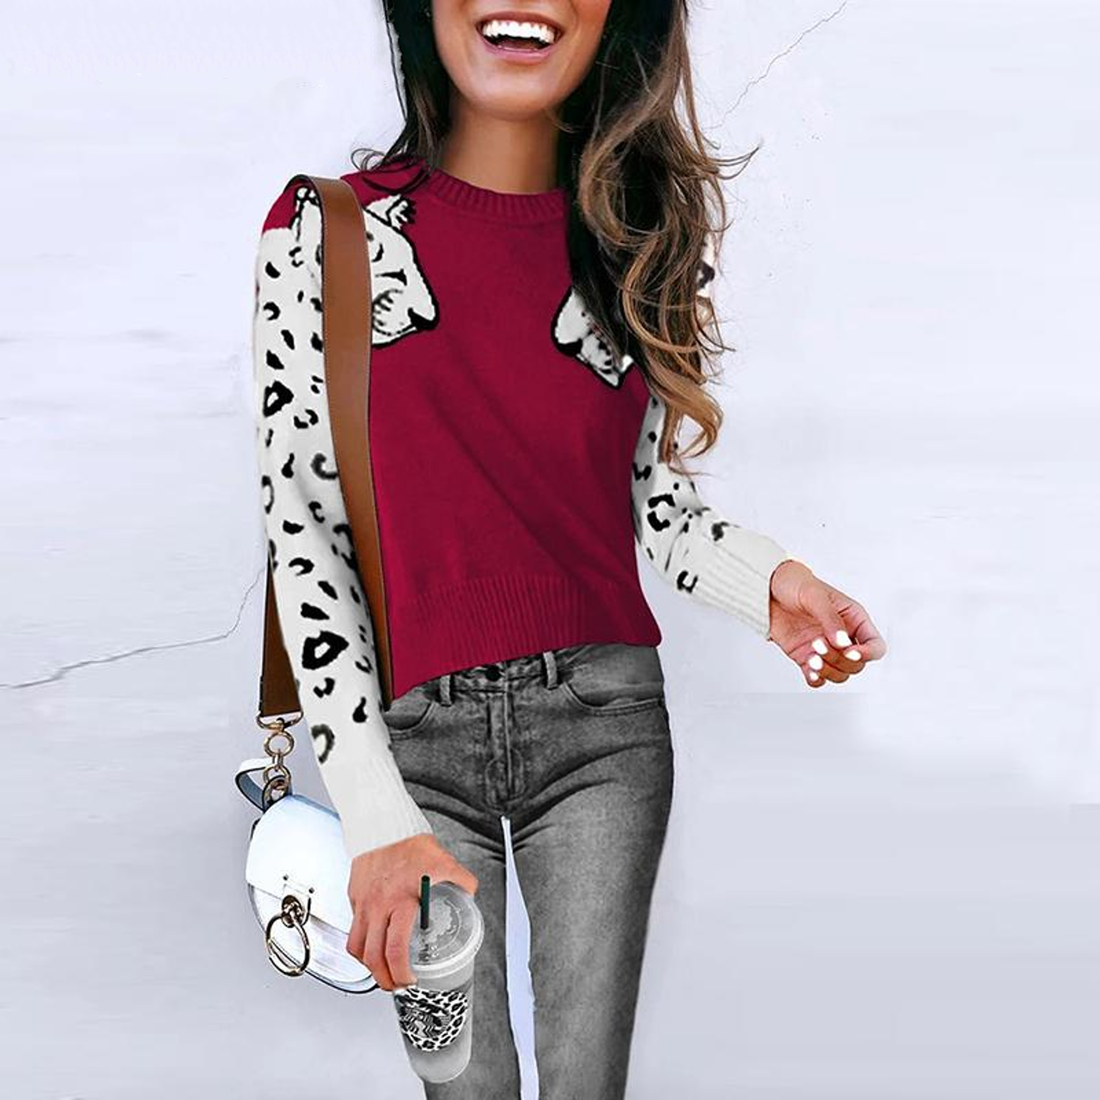 Women's Autumn/Winter Casual Warm Knitted Sweater With Animal Print